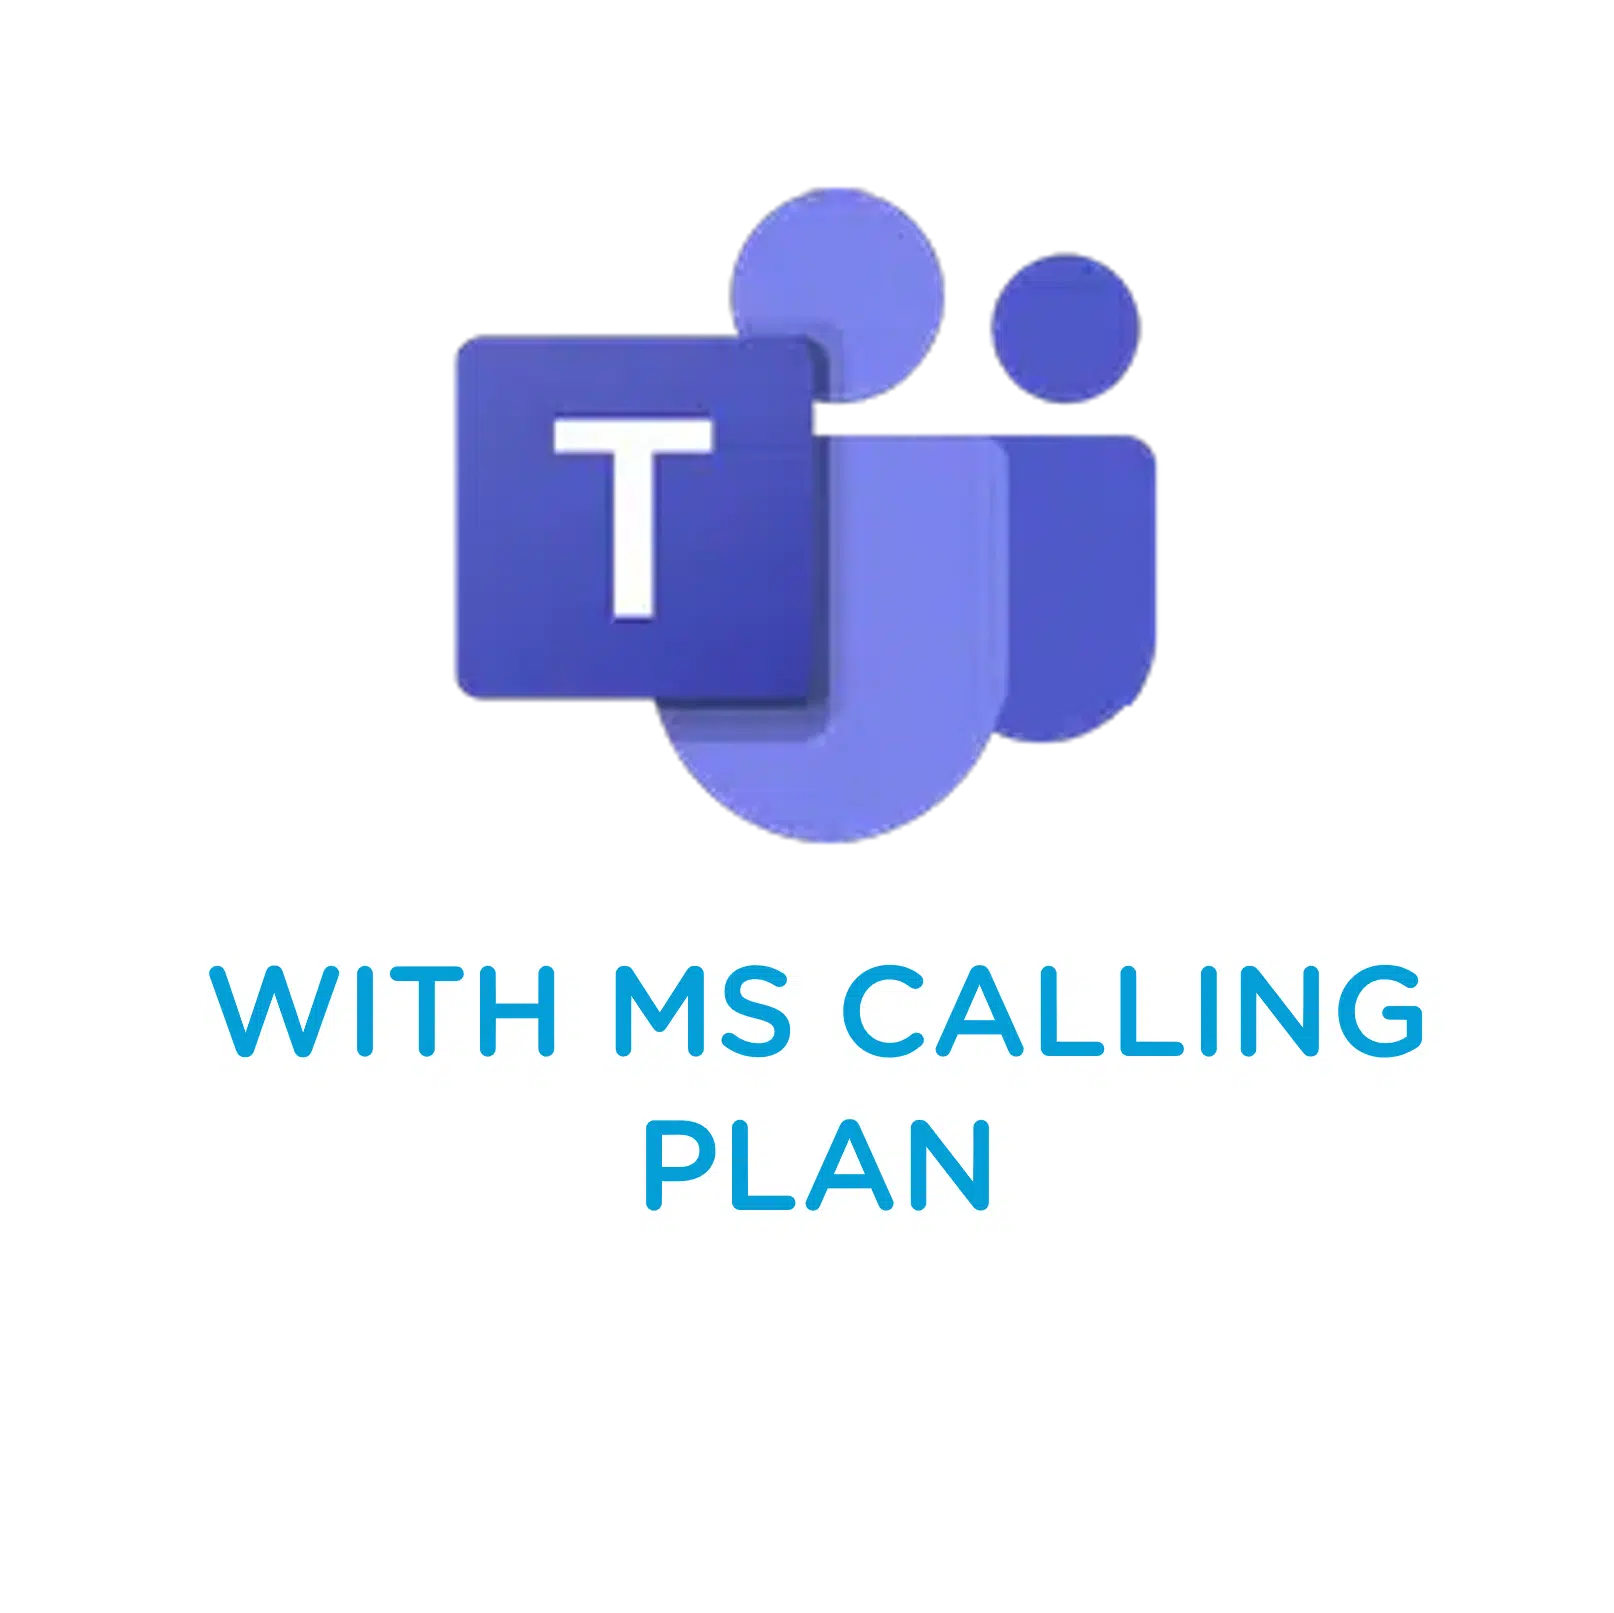 Microsoft Teams with Calling Plans